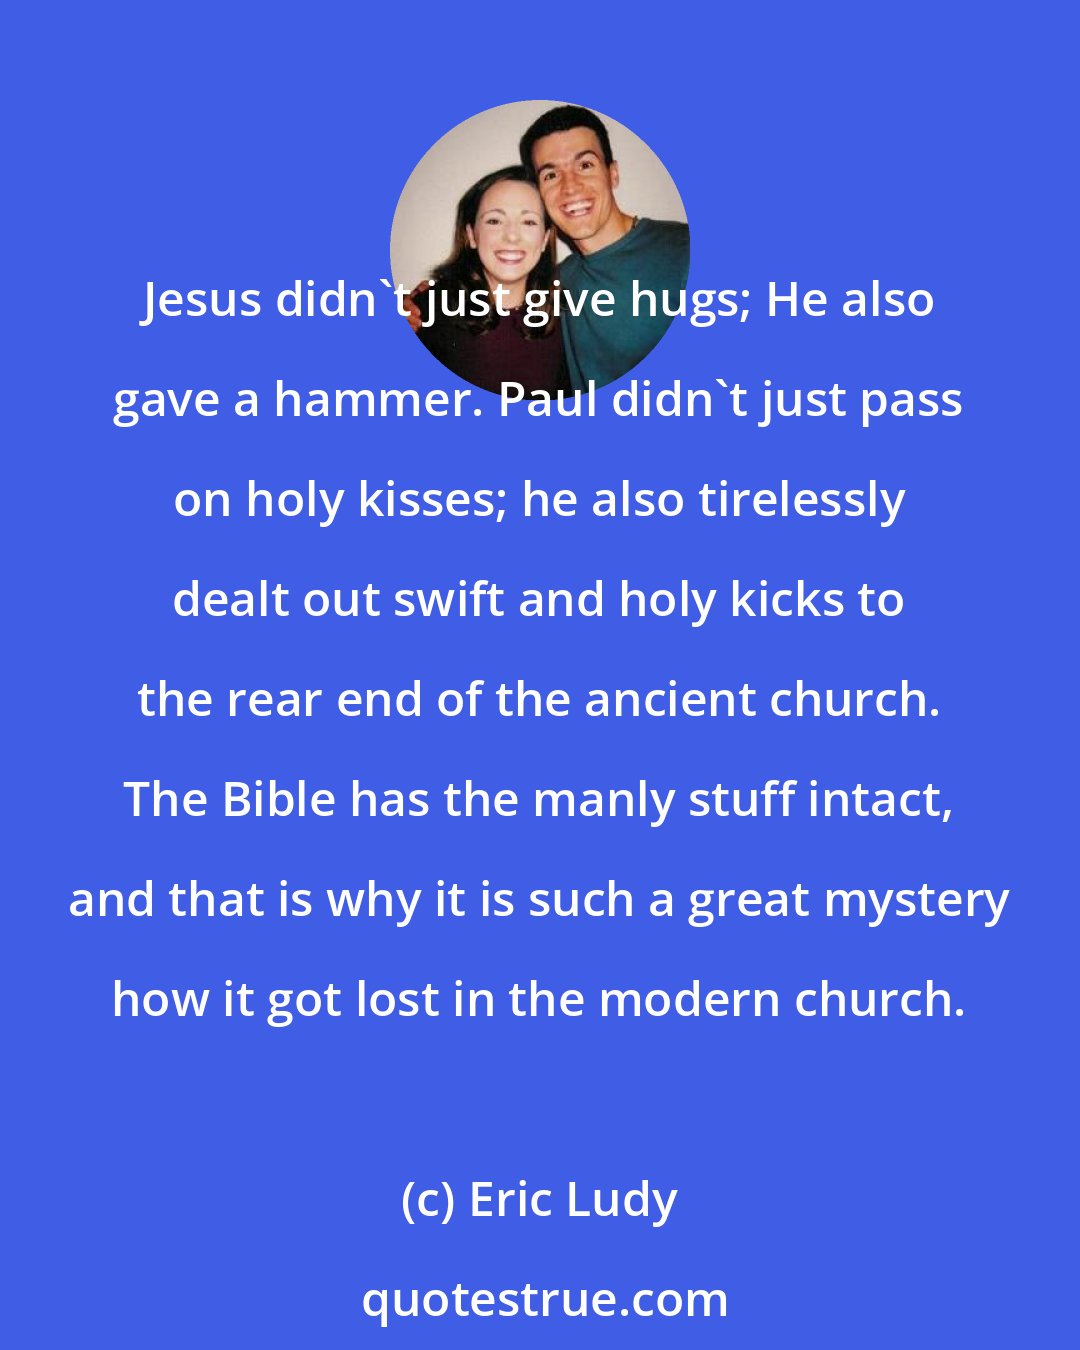 Eric Ludy: Jesus didn't just give hugs; He also gave a hammer. Paul didn't just pass on holy kisses; he also tirelessly dealt out swift and holy kicks to the rear end of the ancient church. The Bible has the manly stuff intact, and that is why it is such a great mystery how it got lost in the modern church.